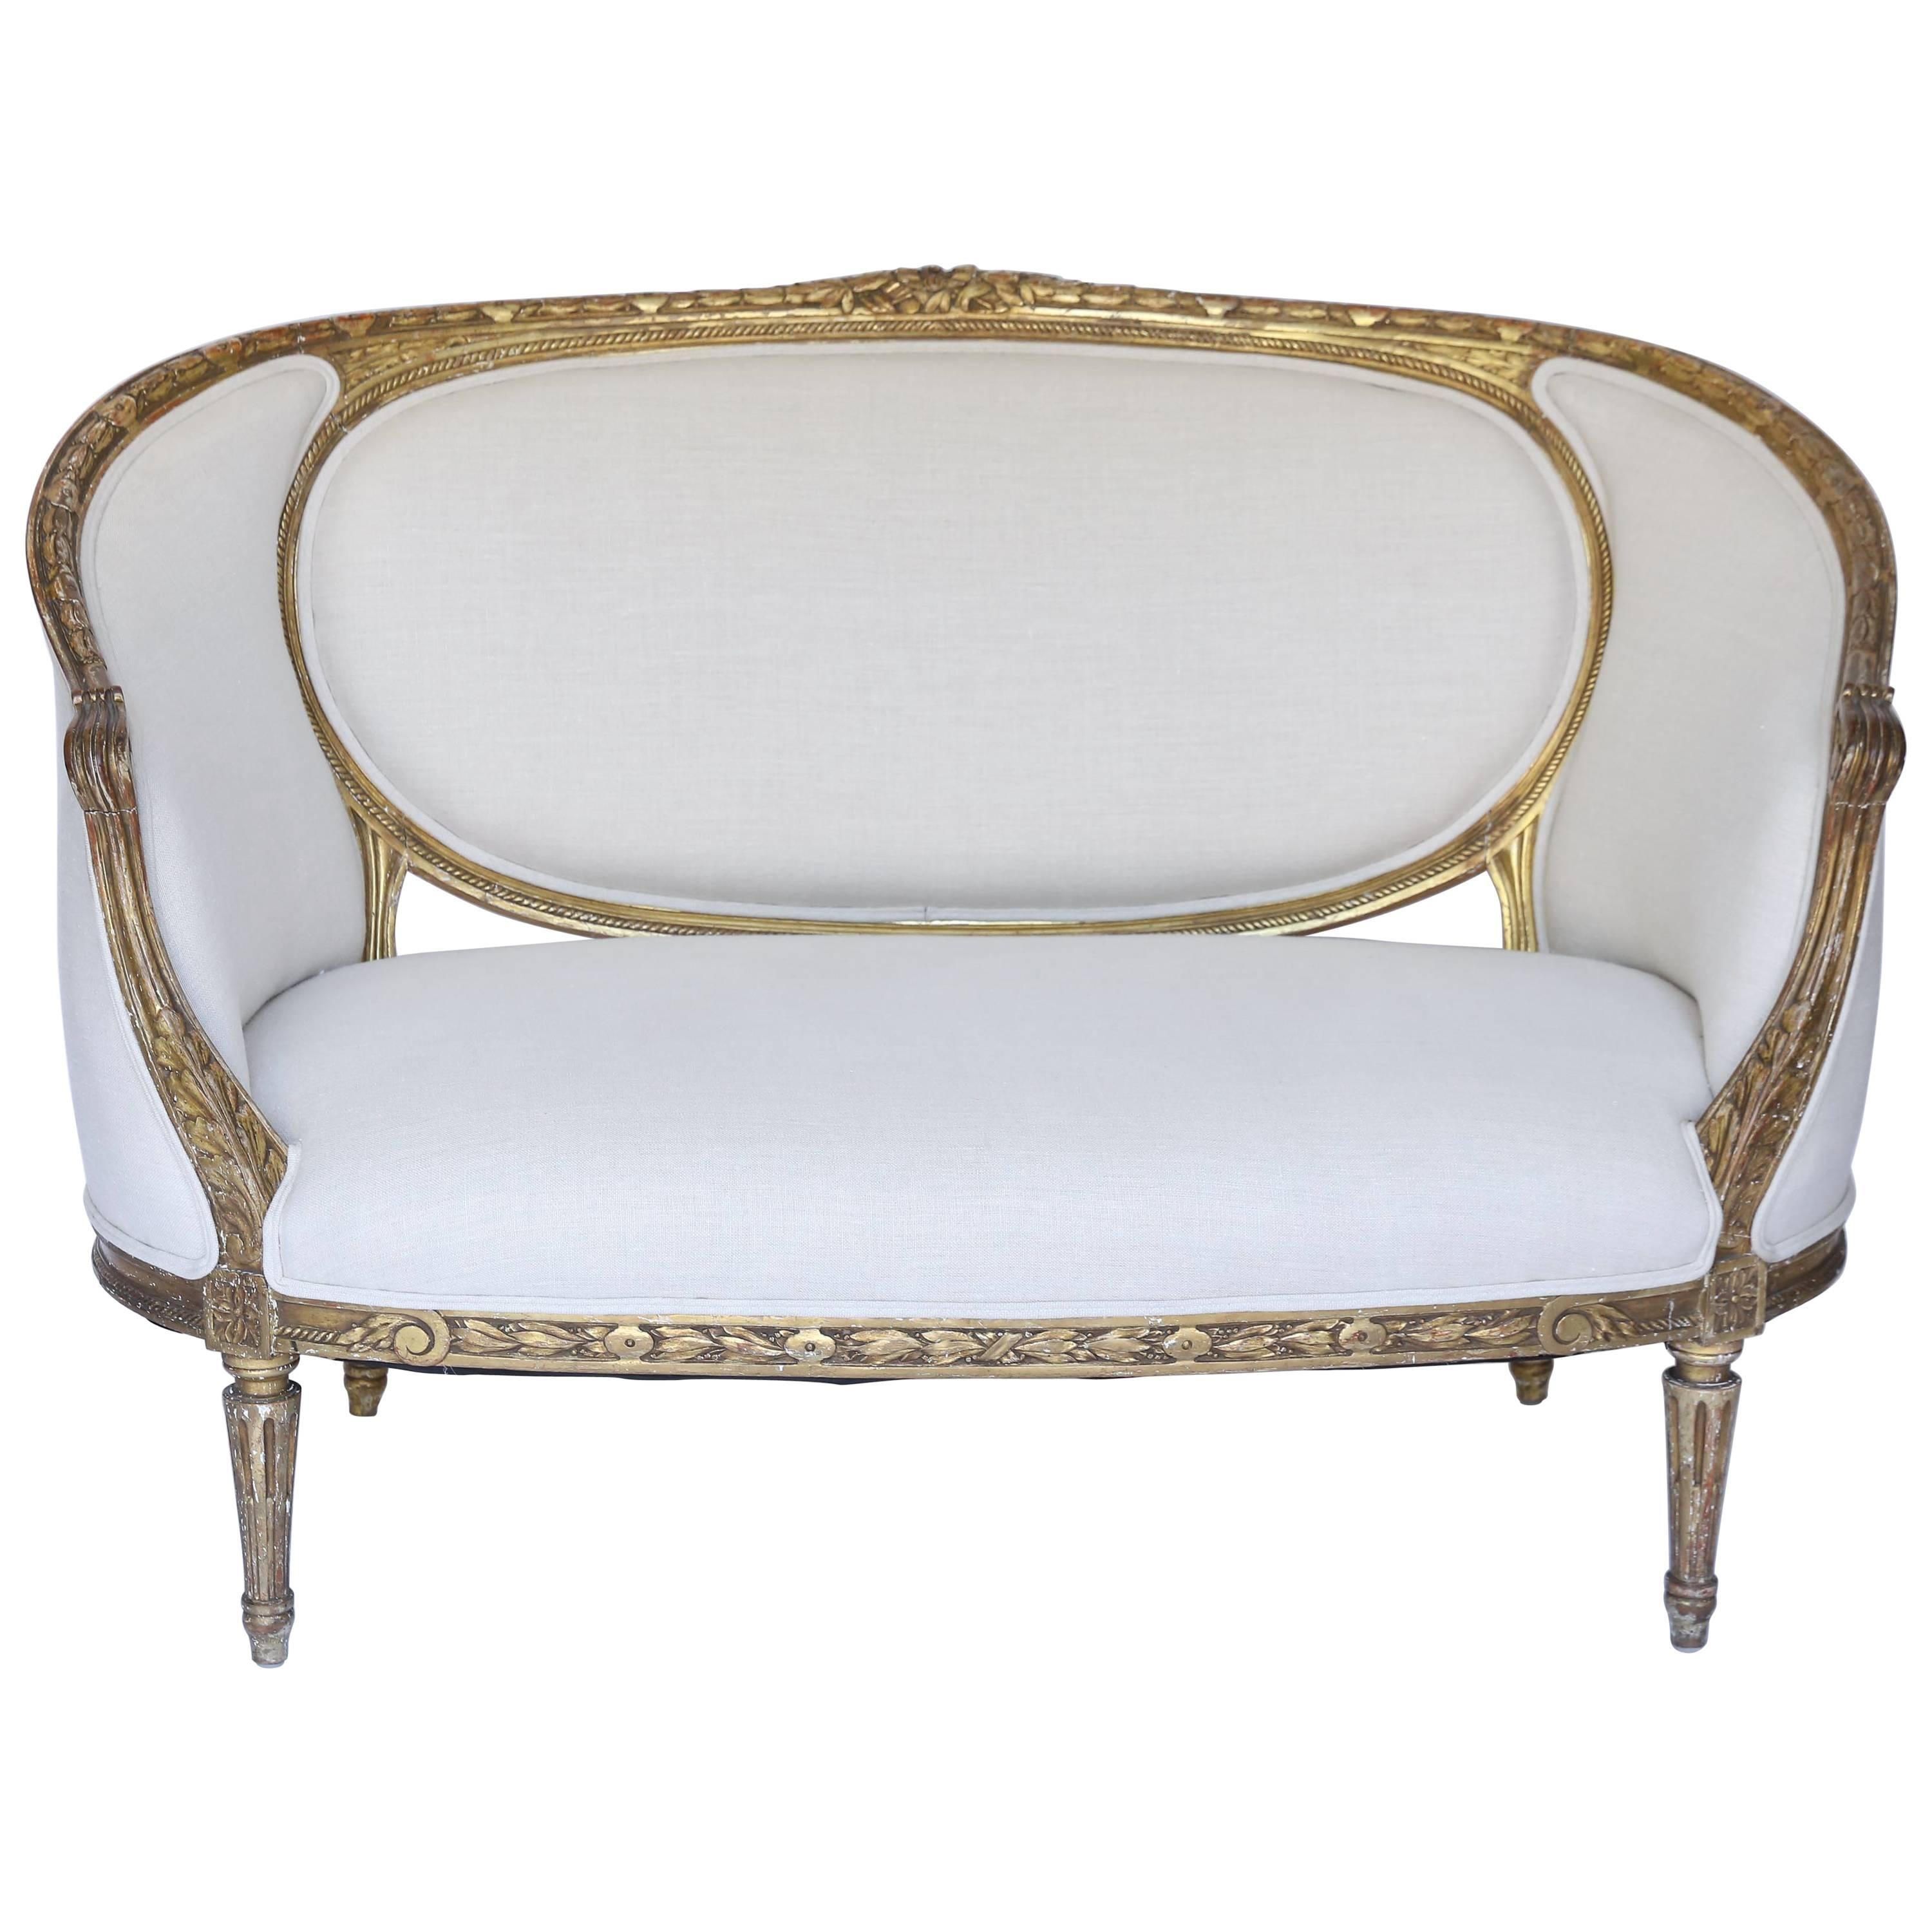 19th Century Louis XVI French Settee, Newly Upholstered